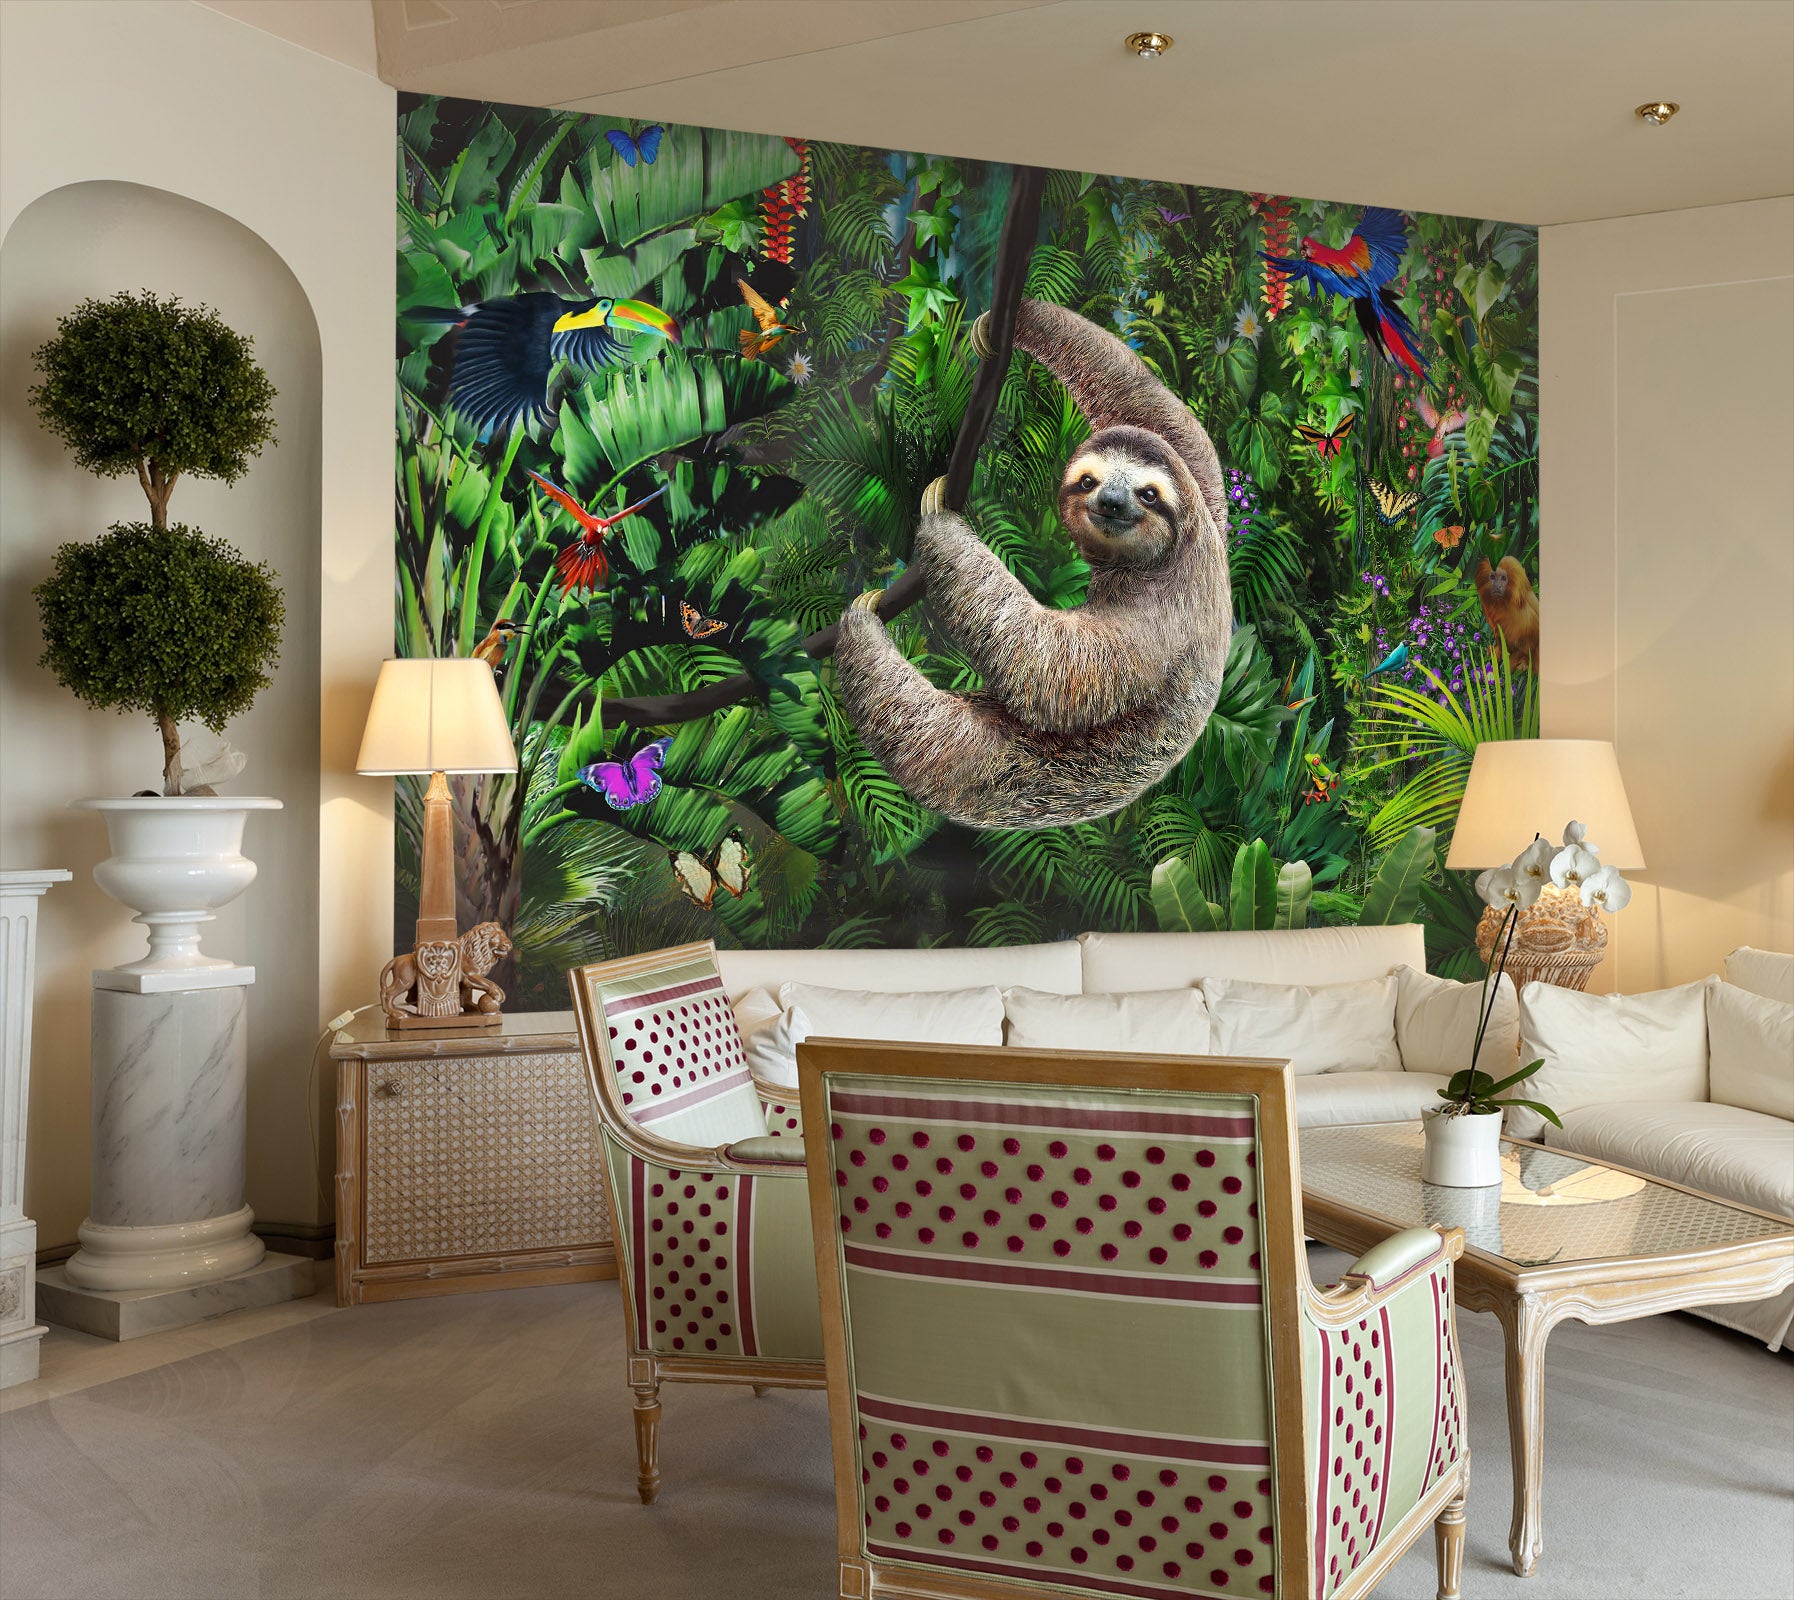 3D Forest Sloth 1427 Adrian Chesterman Wall Mural Wall Murals